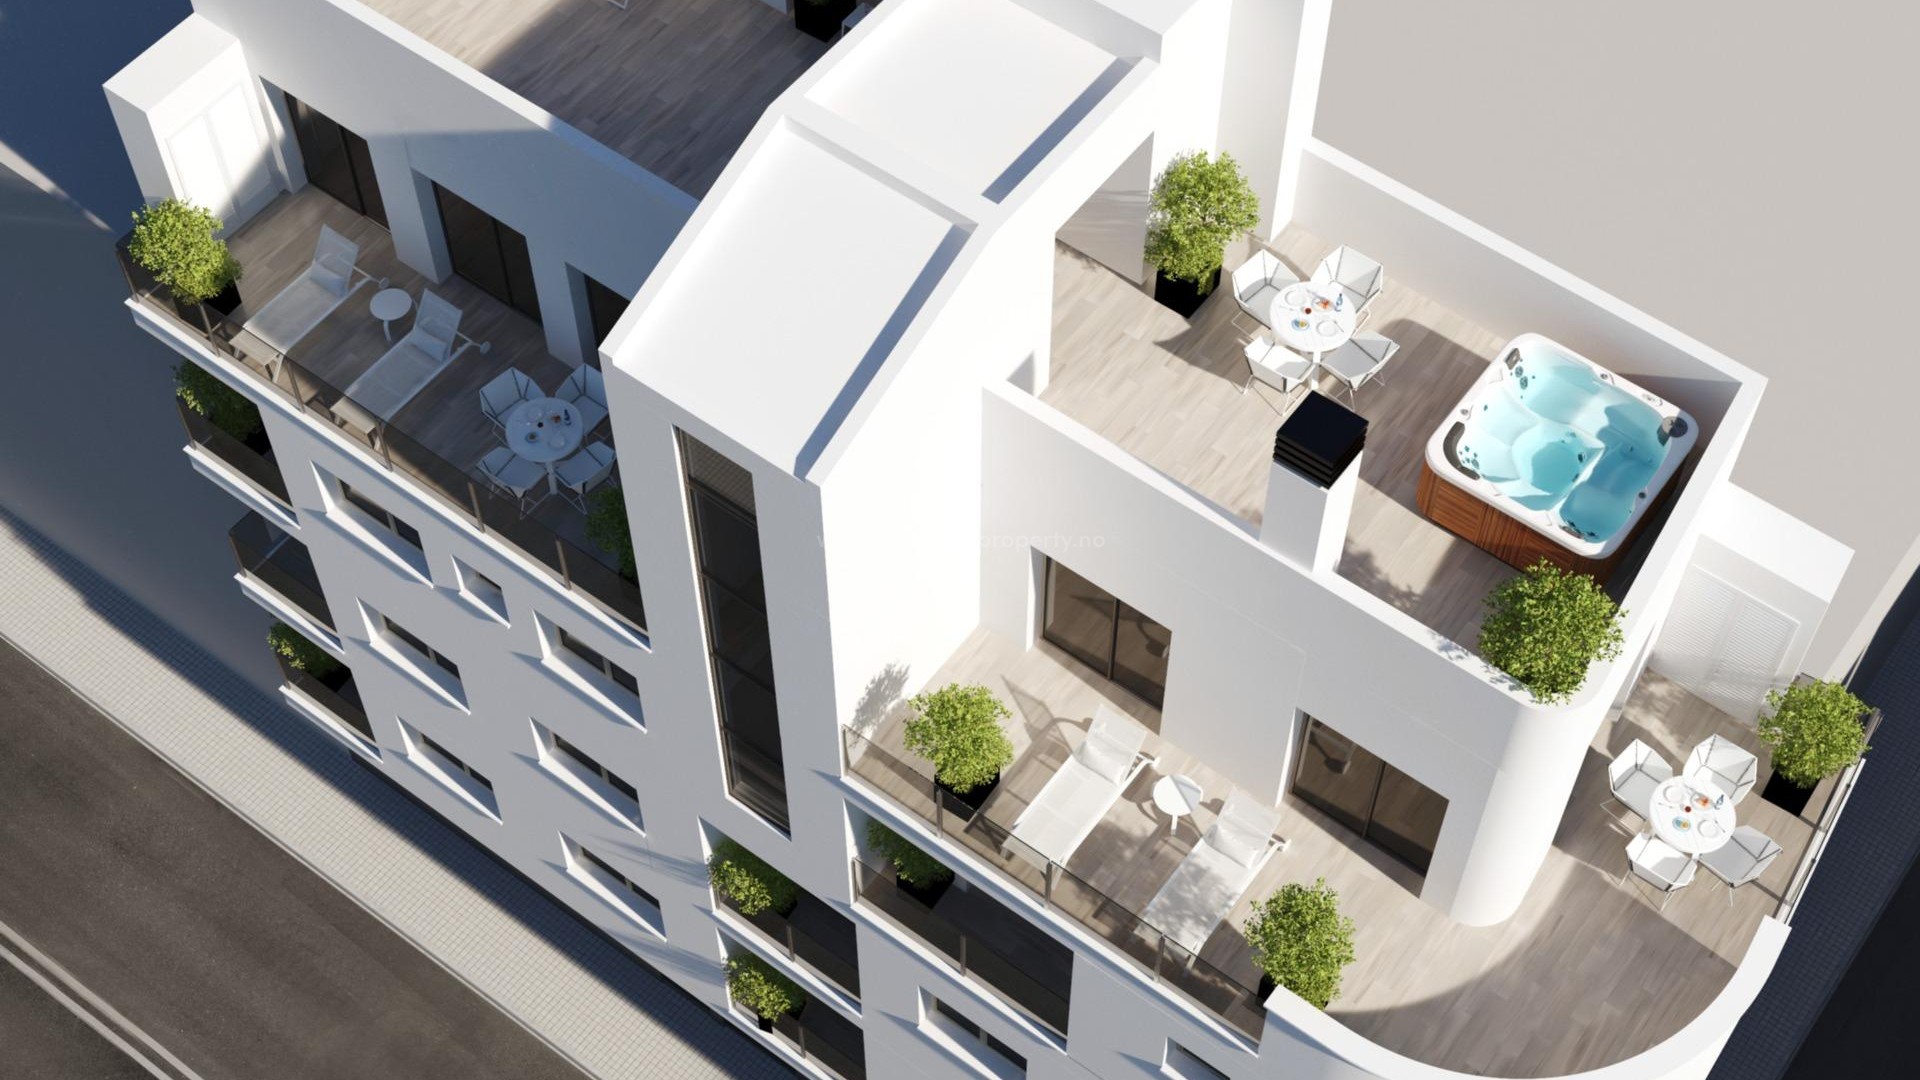 New apartments and penthouses with modern design in Torrevieja, 1/2 bedroom, 1/2 bathroom, large shared solarium, open plan kitchen and living room